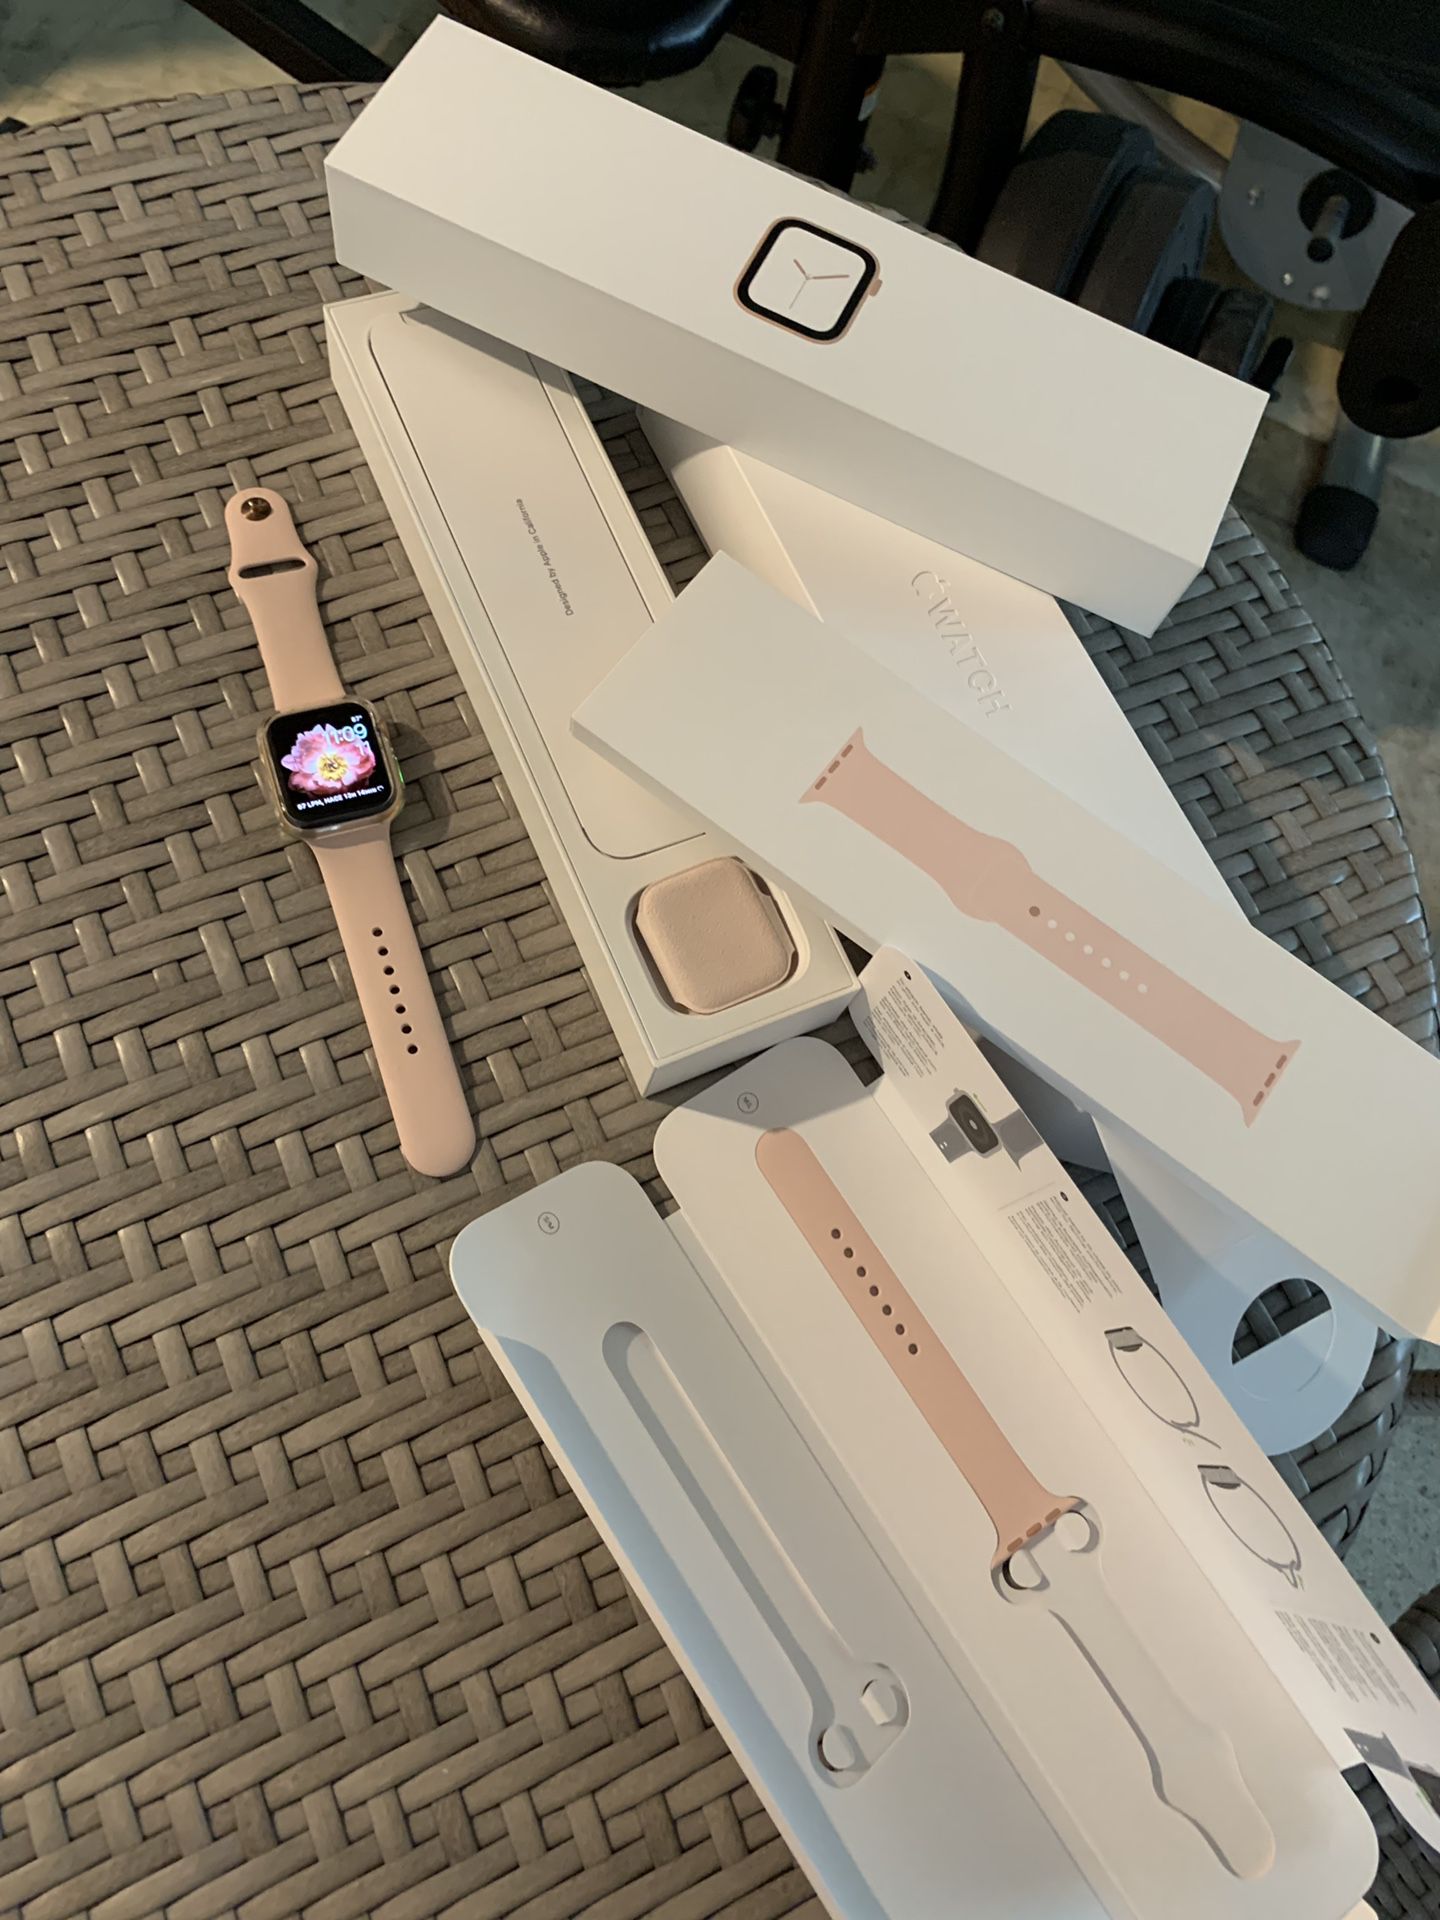 Apple Watch series 4 44mm like new minimum price 370 no asking for low price thanks